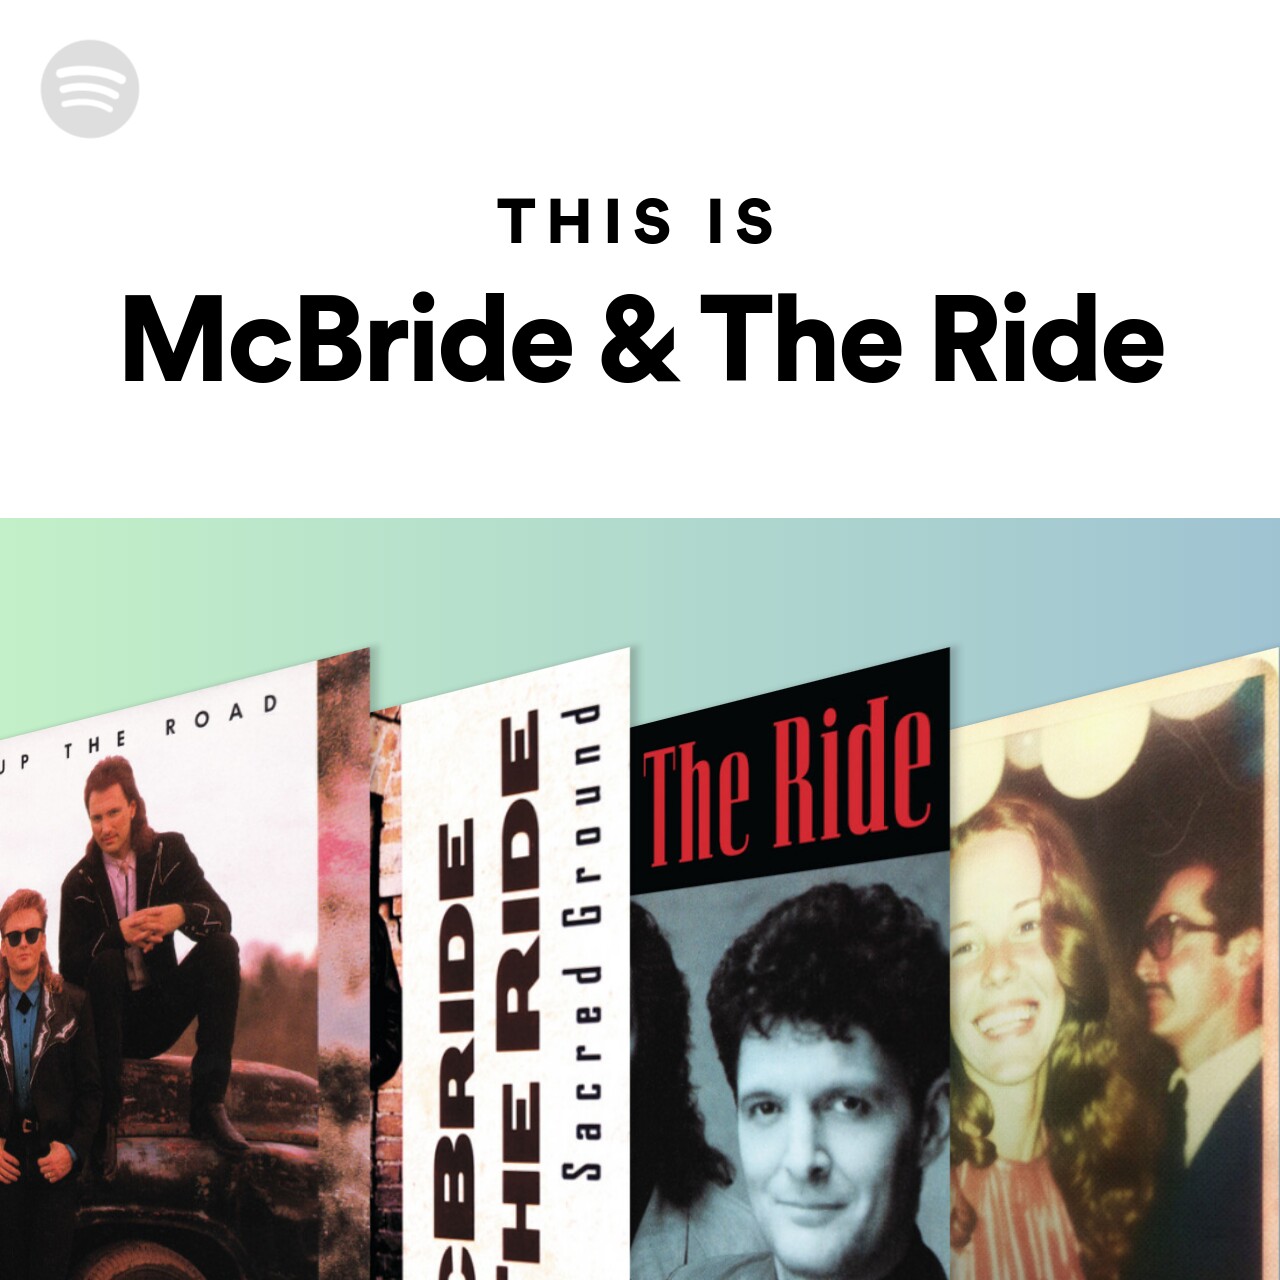 This Is McBride & The Ride